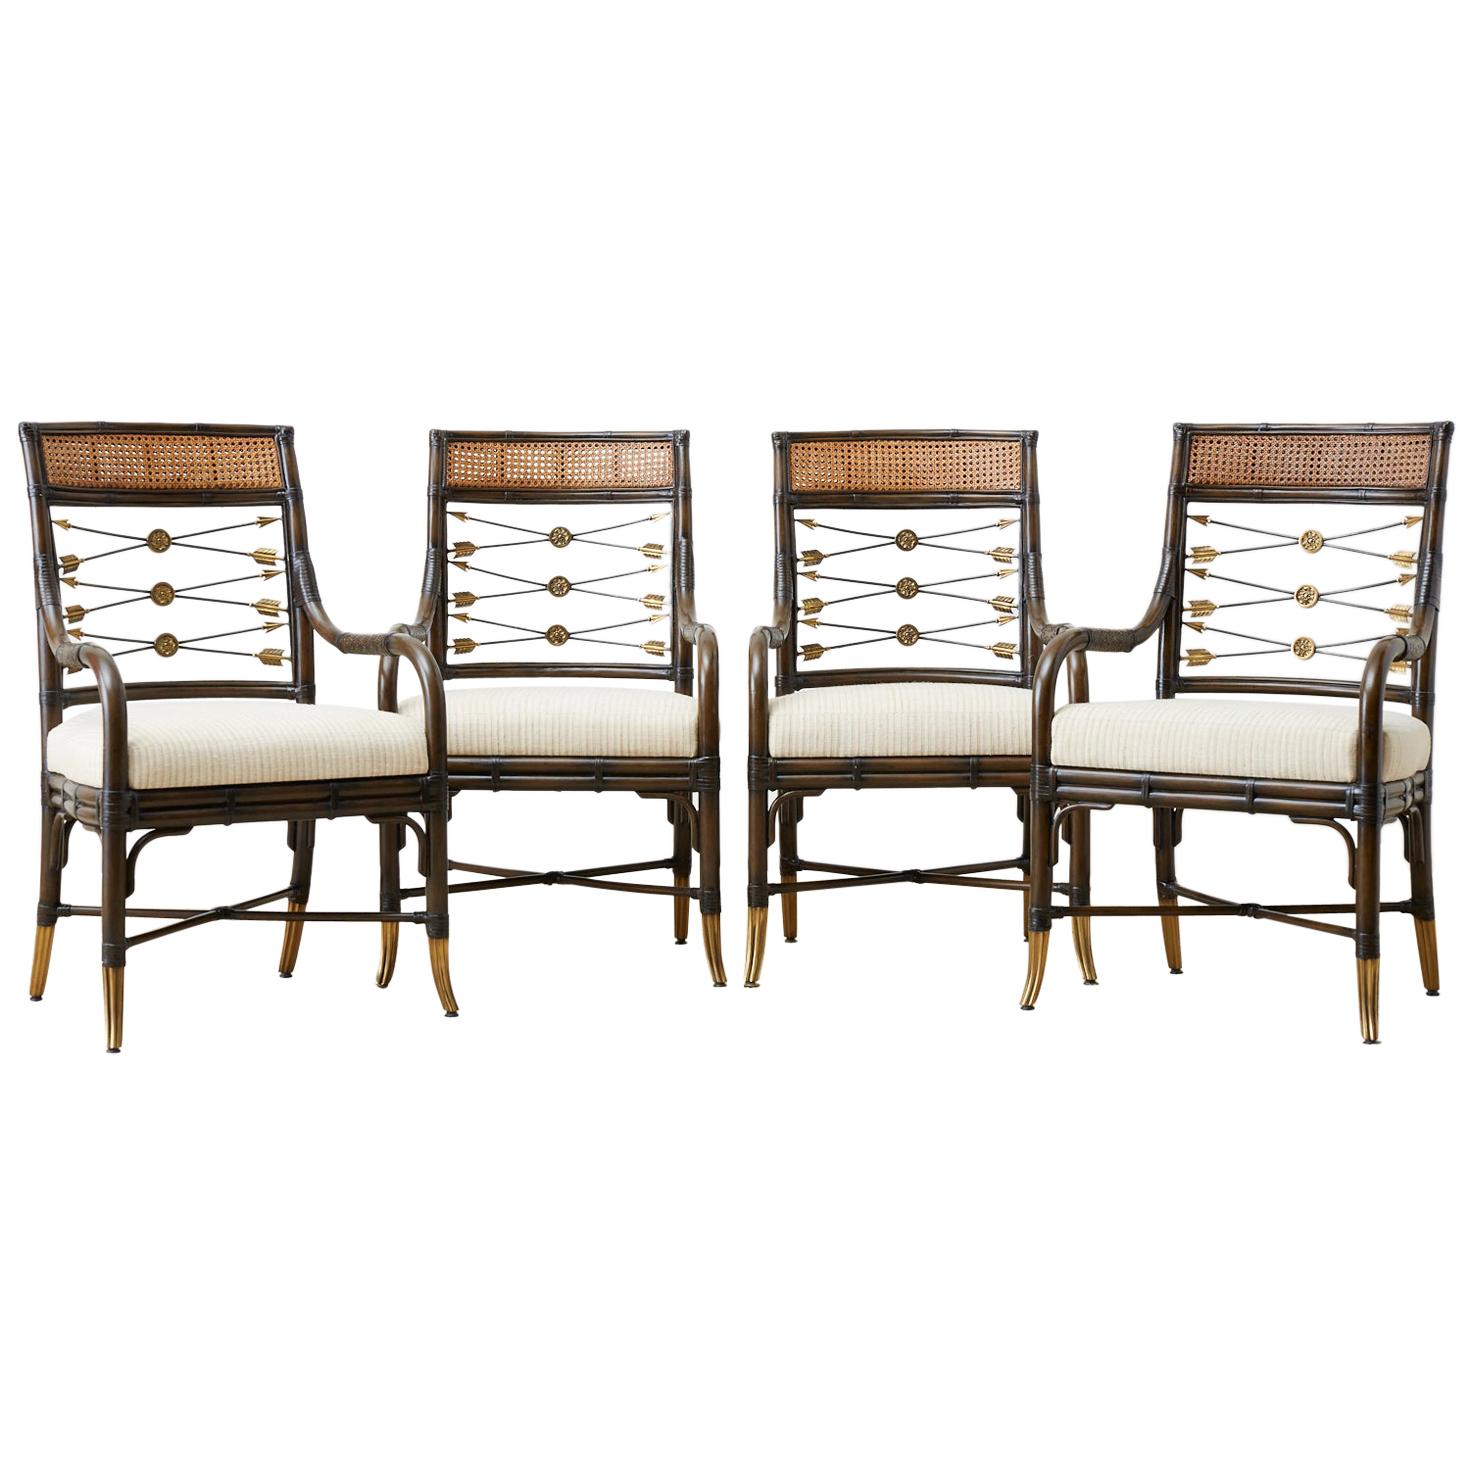 Set of Four Neoclassical Style Rattan Dining Armchairs